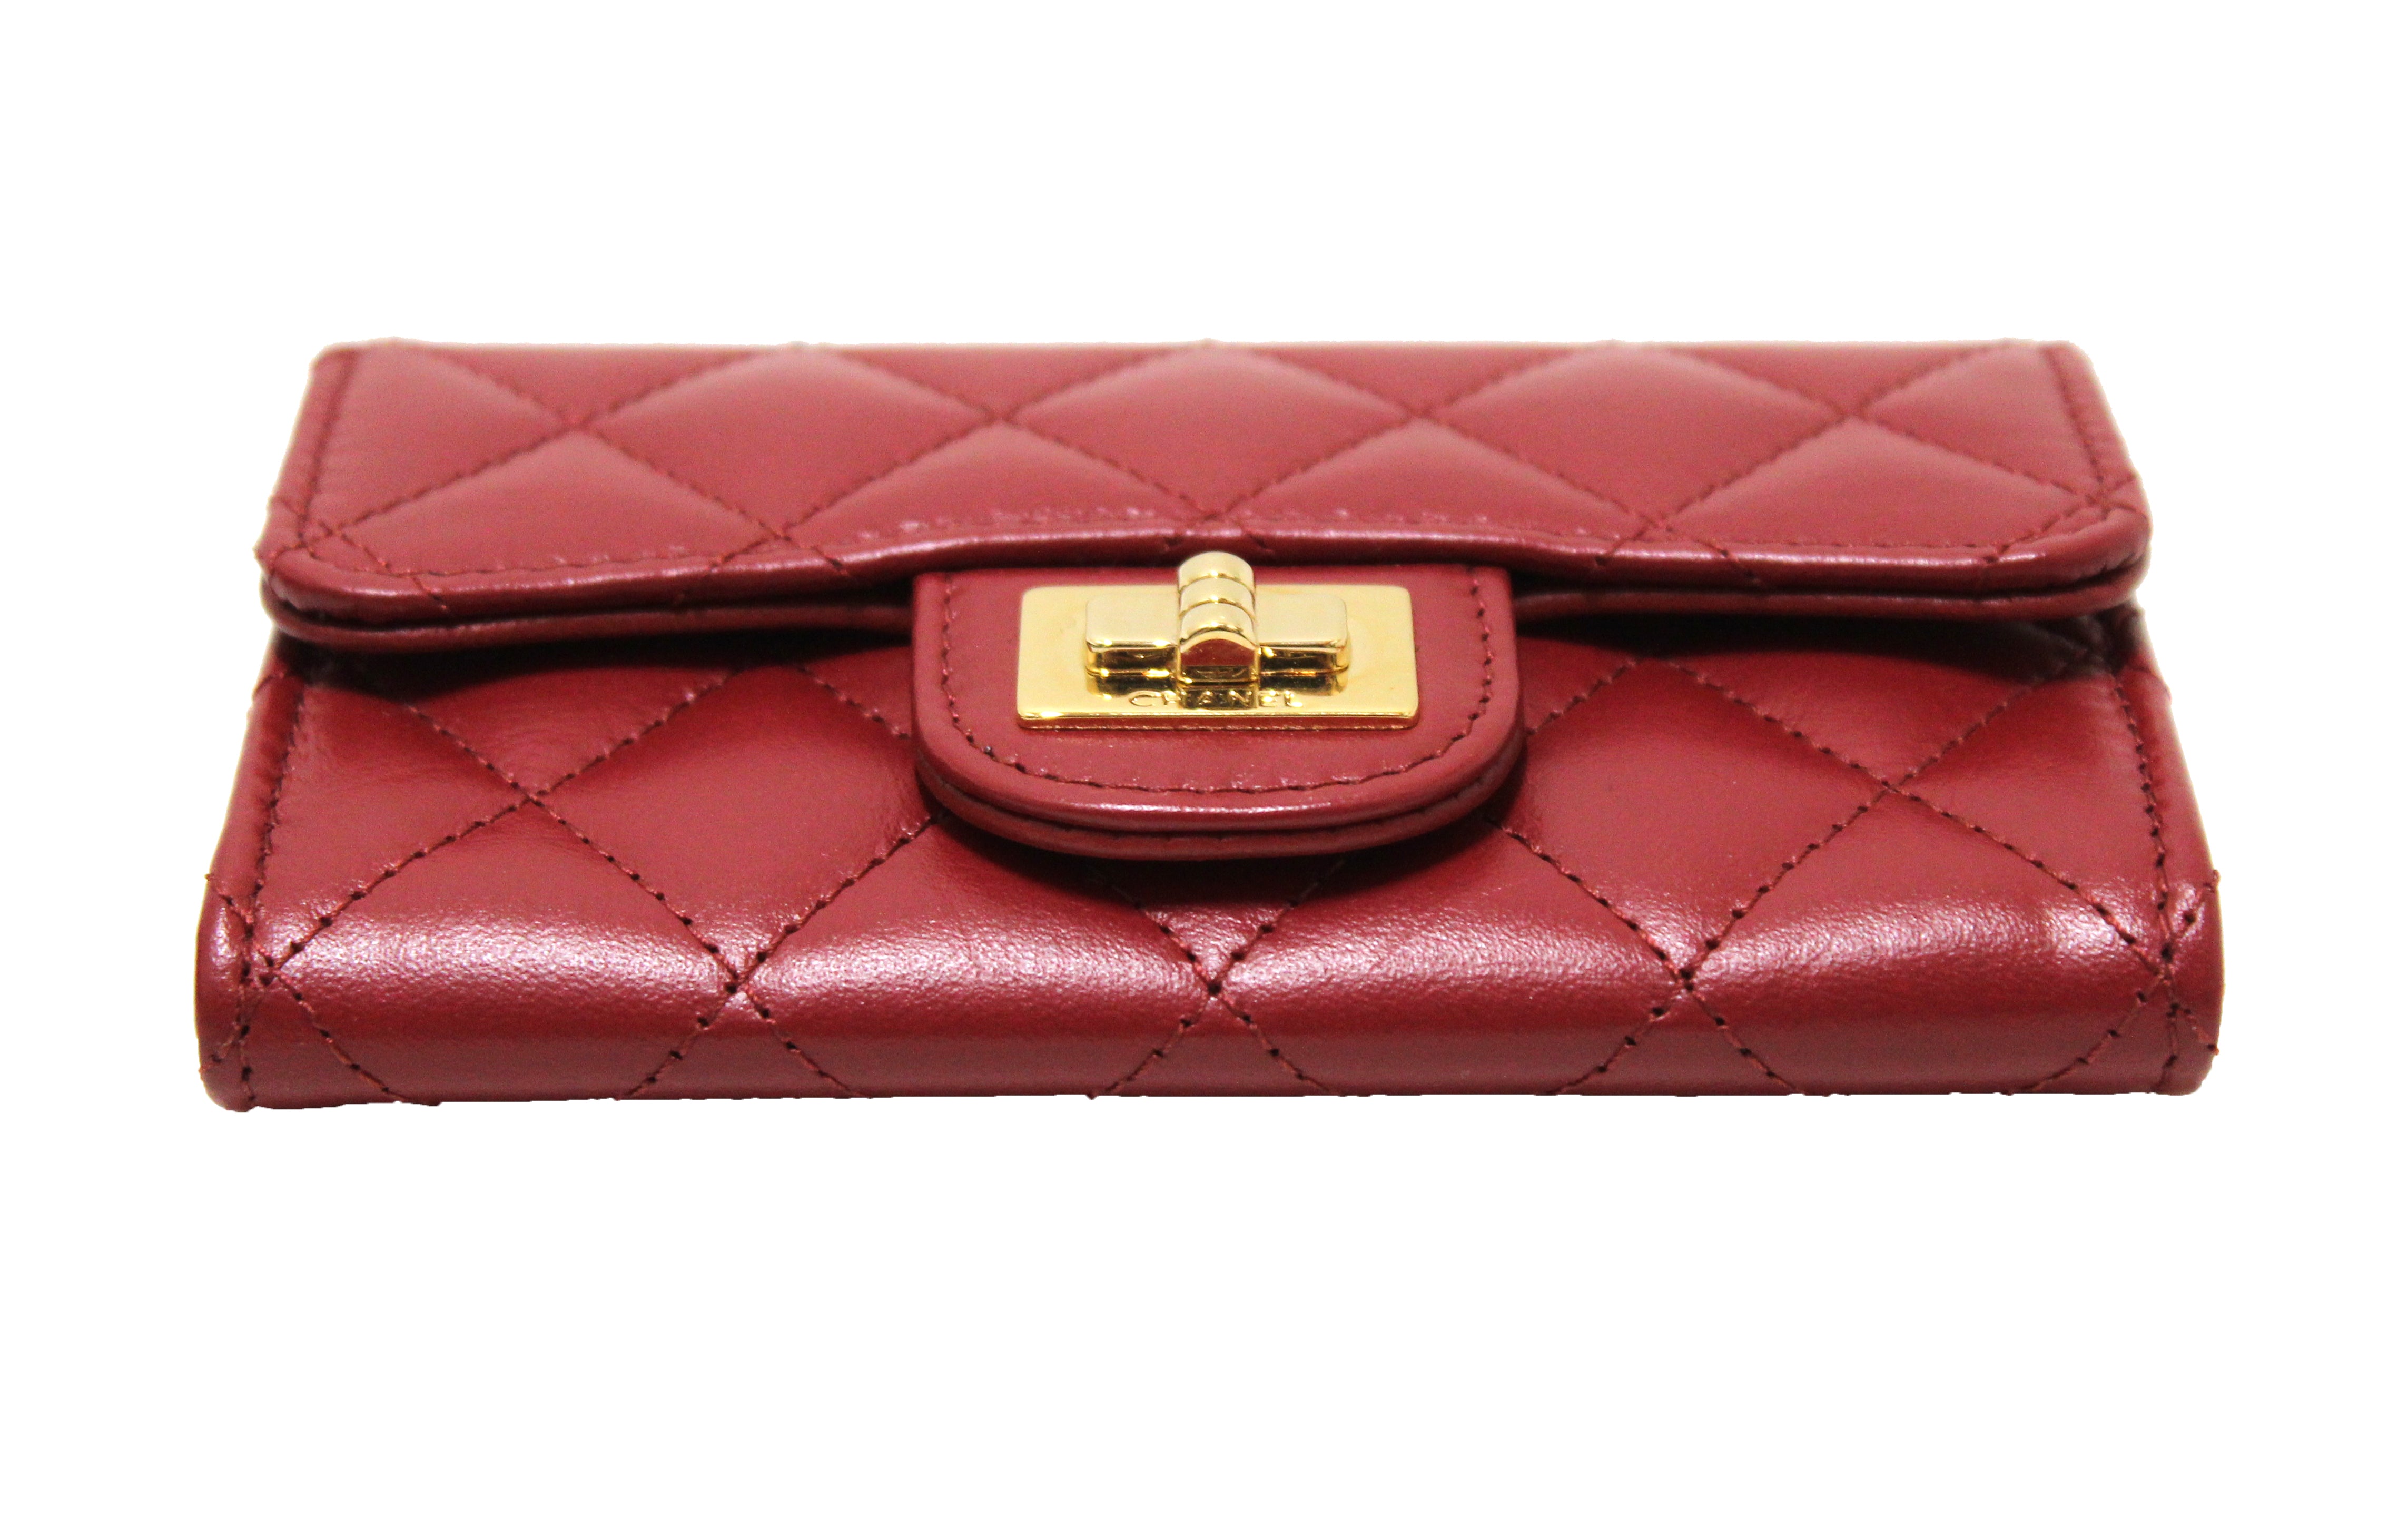 Chanel Calfskin Stitched Clutch Flap Red